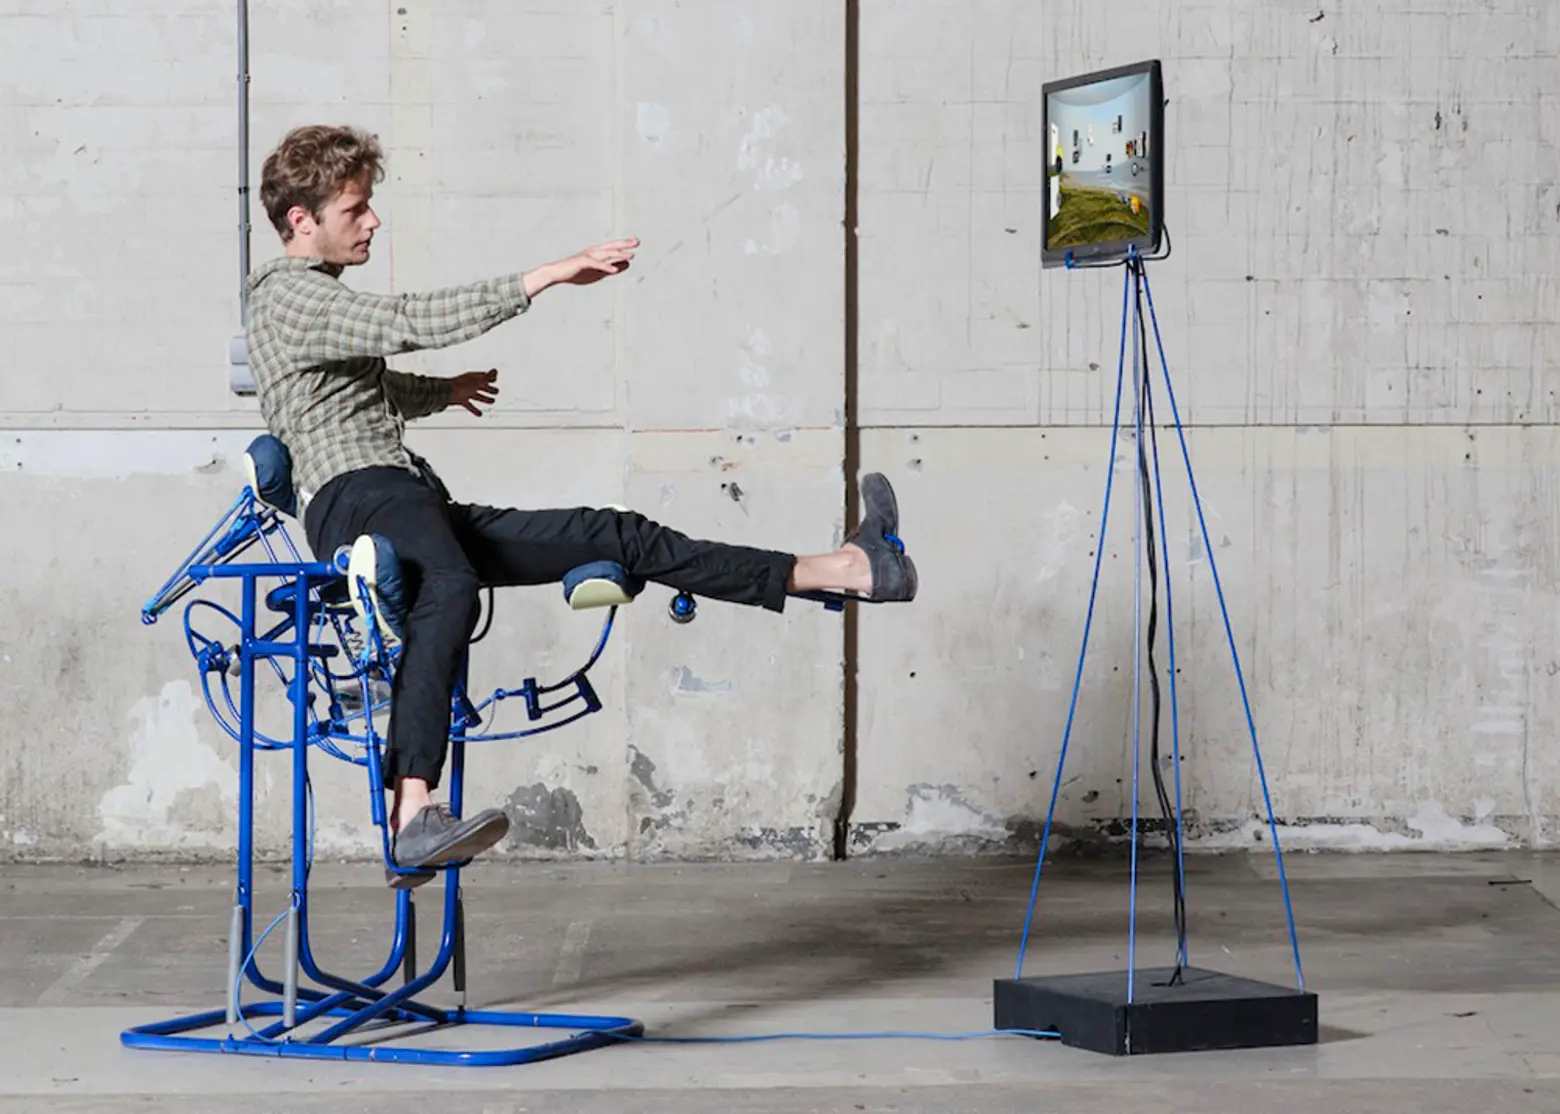 Govert Flint’s Futuristic Computer Chairs Allow You to Click with a Kick